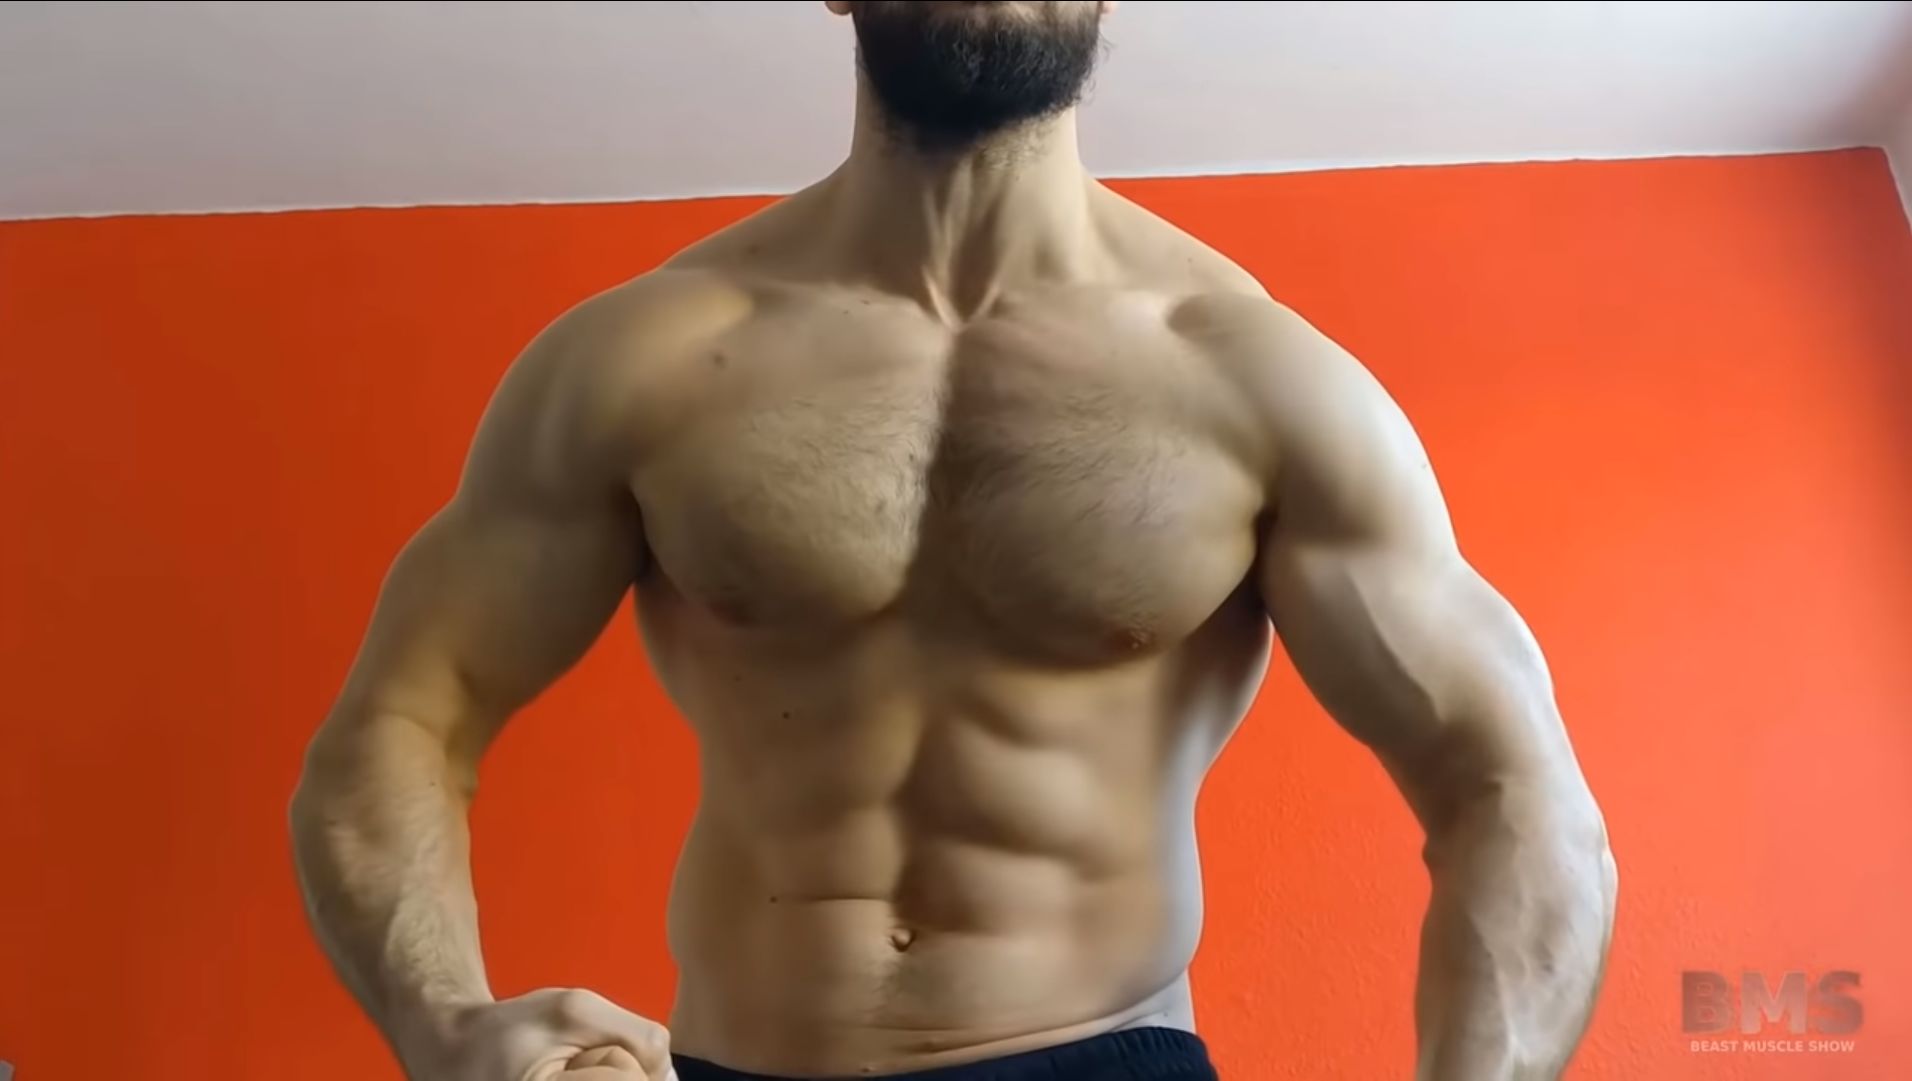 Worship the ULTIMATE ALPHA Musclegod - Beast Muscle Show.